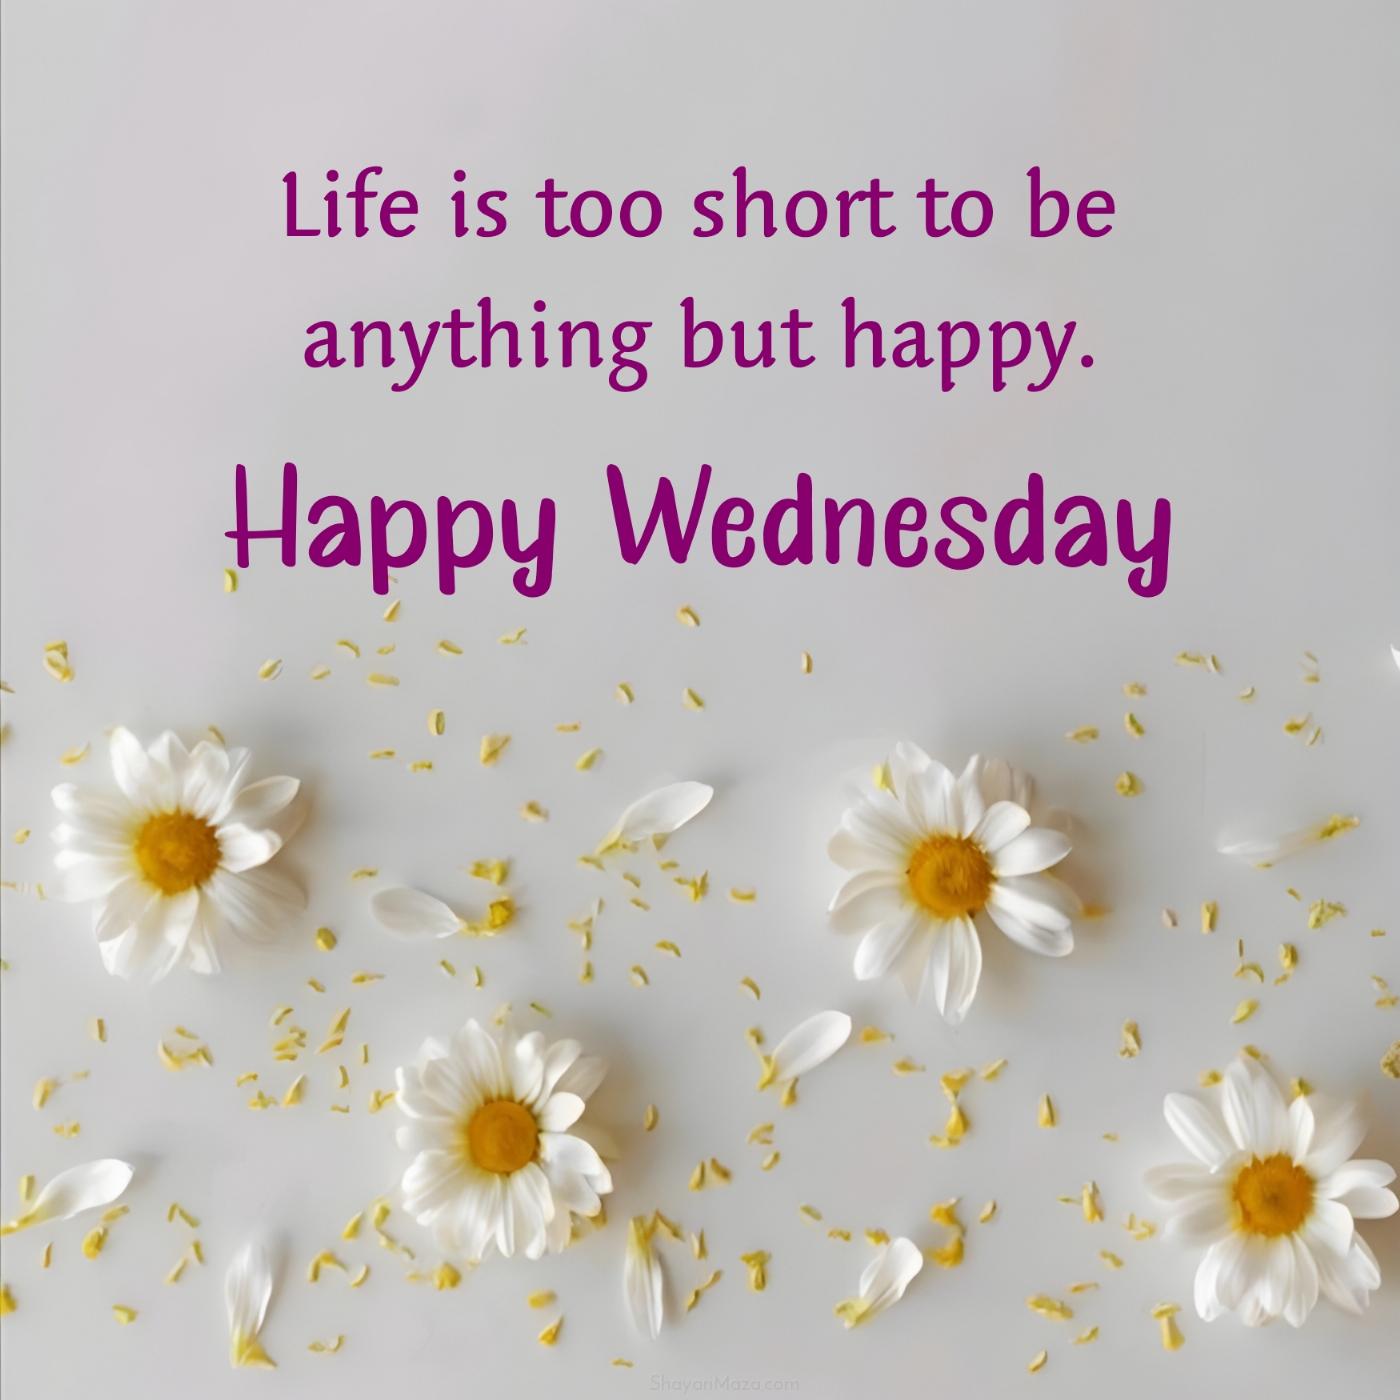 Happy Wednesday! Life is too short to be anything